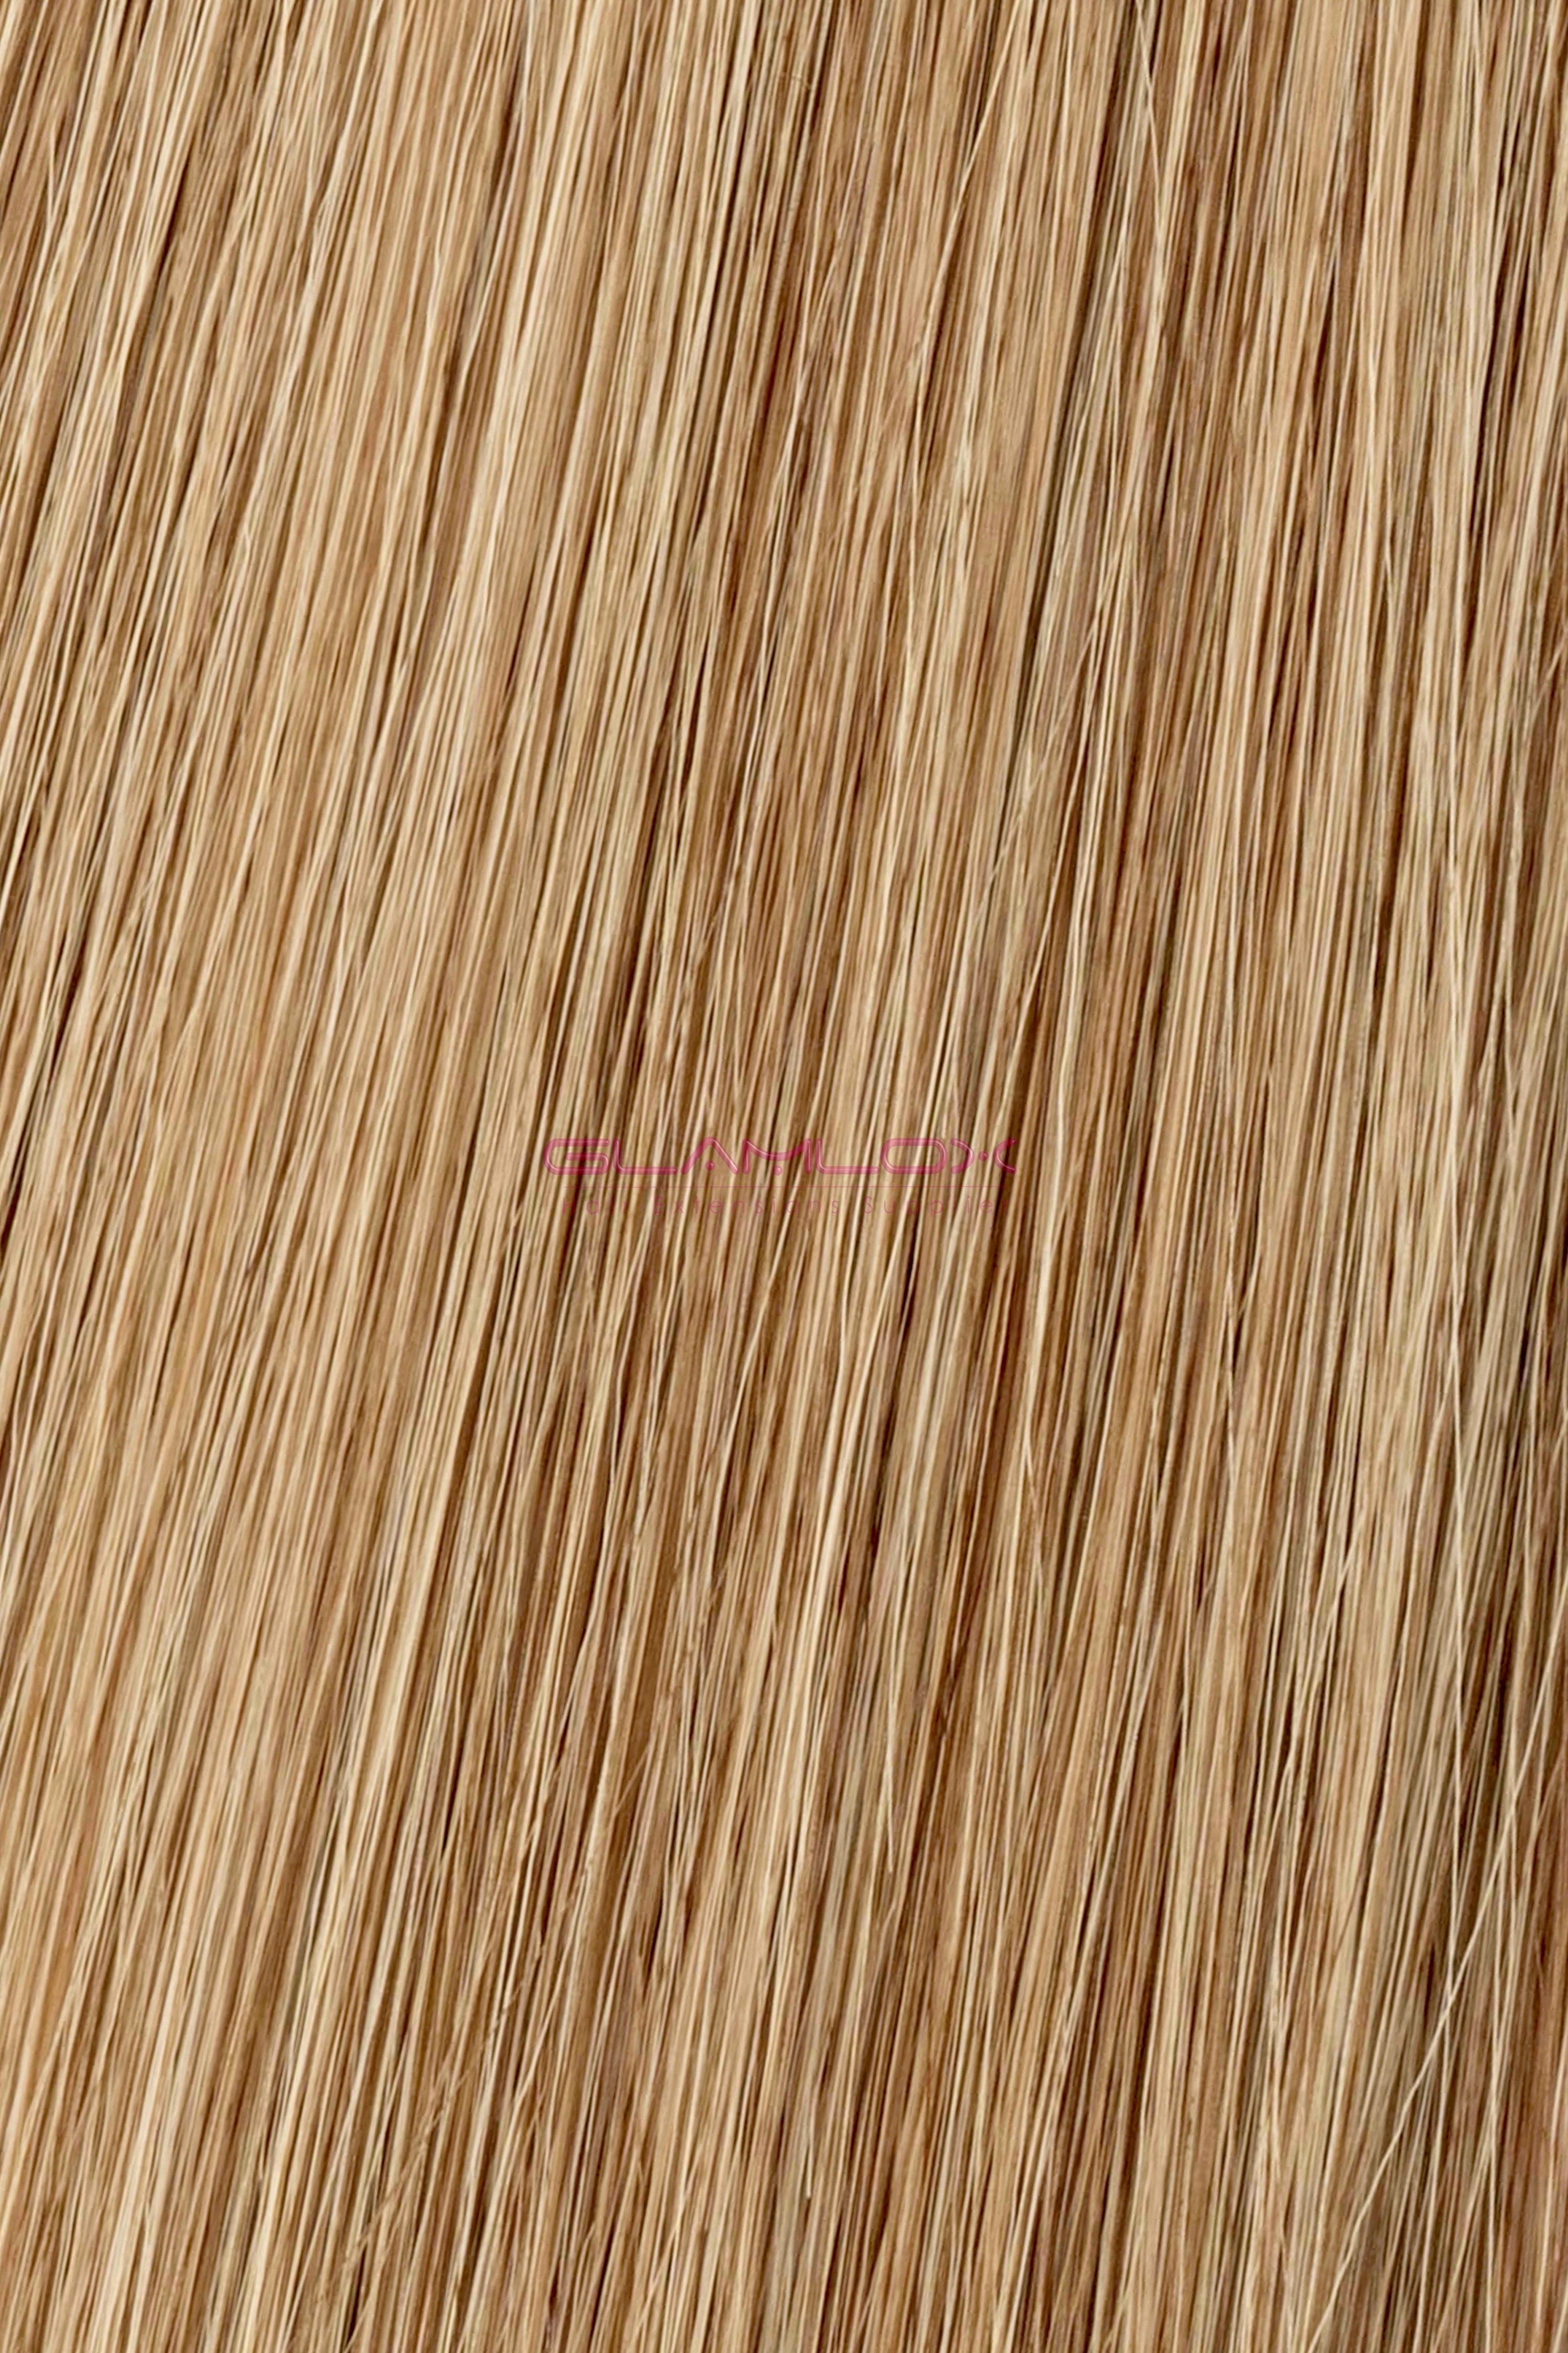 16" Nano Ring Hair Extensions - Russian Mongolian Double Drawn Remy Human Hair - 20 Strands